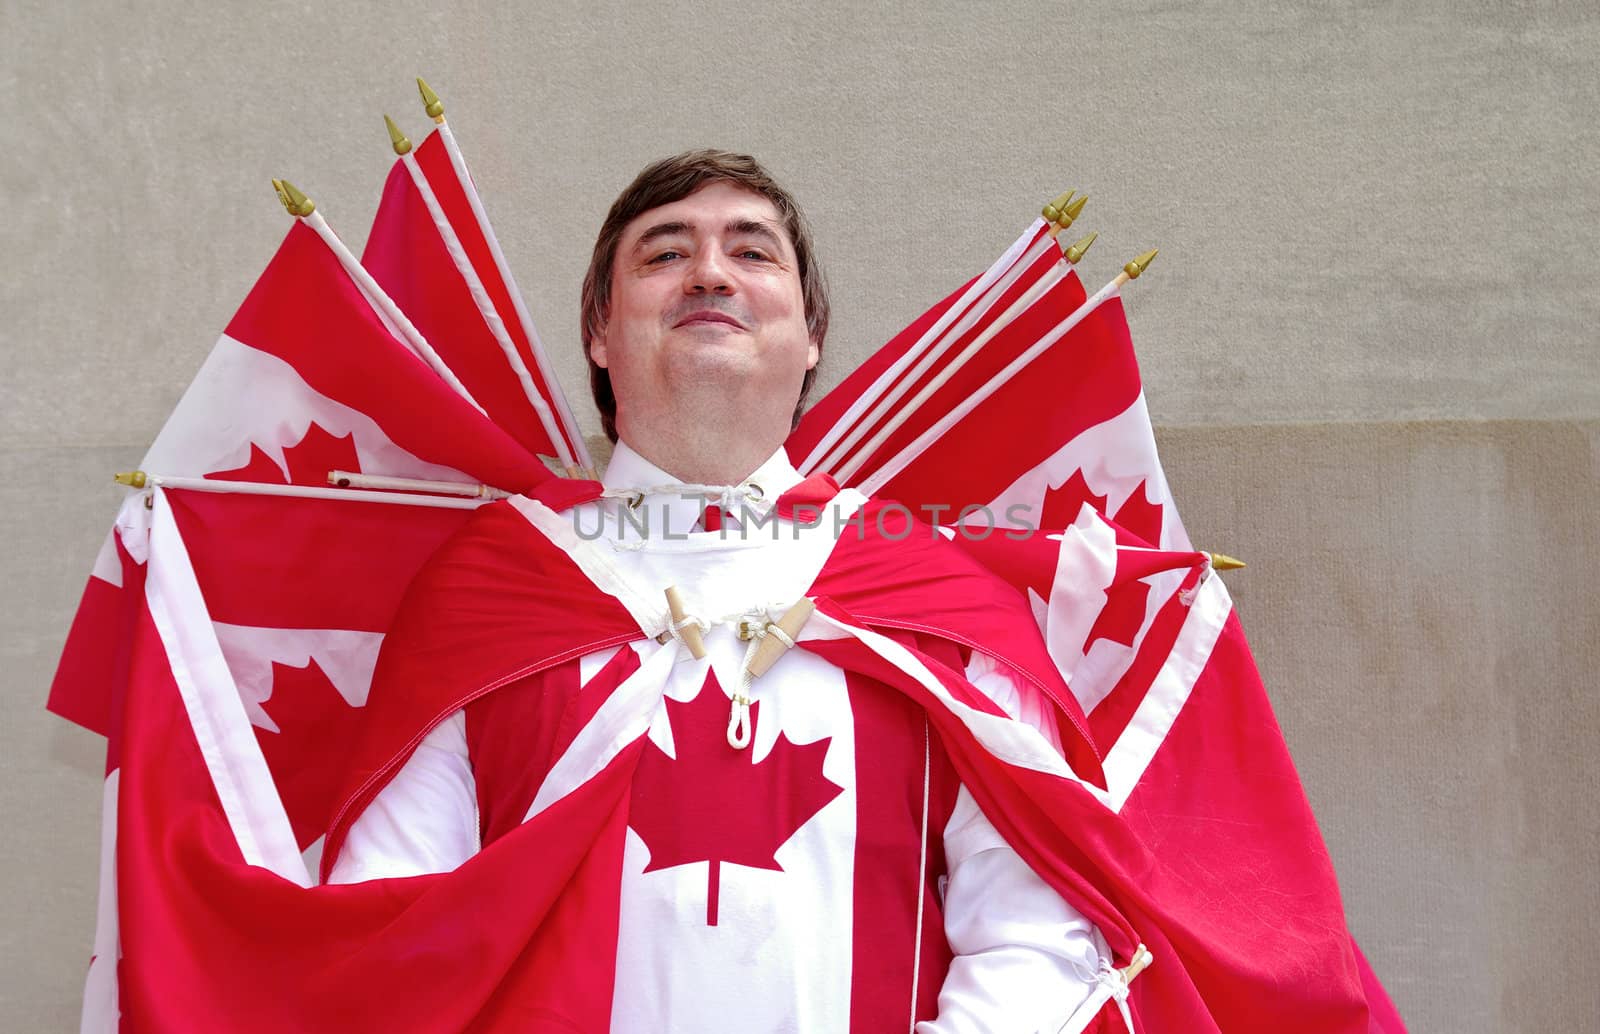 Celebrating Canada Day, a man is dressed with canadian flags.